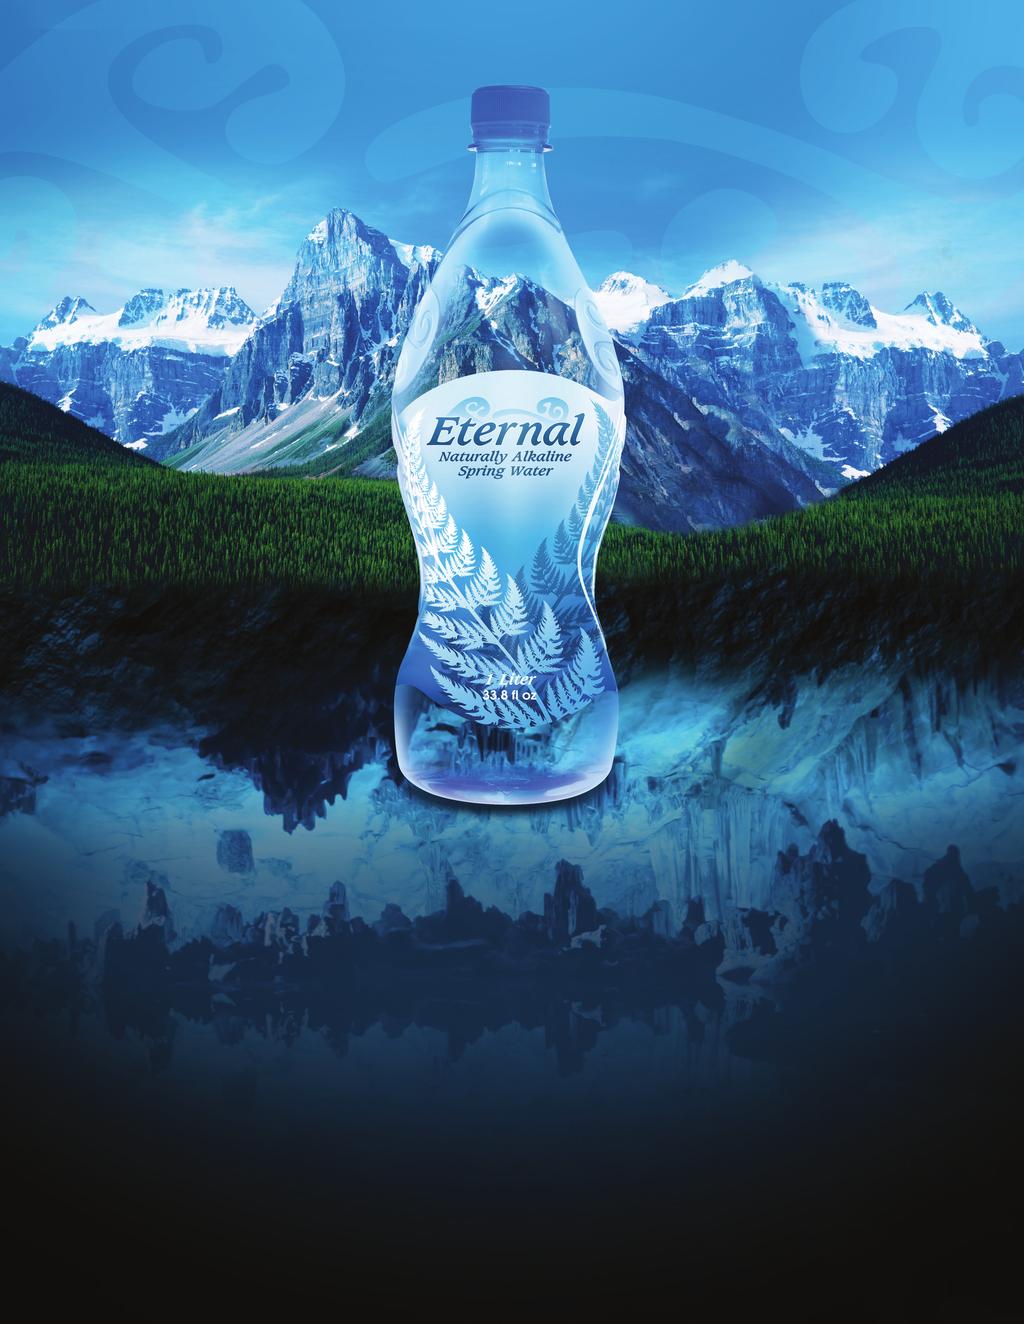 Pure & Pristine Imported from Earth Eternal water comes from the most pure & pristine sources on earth.